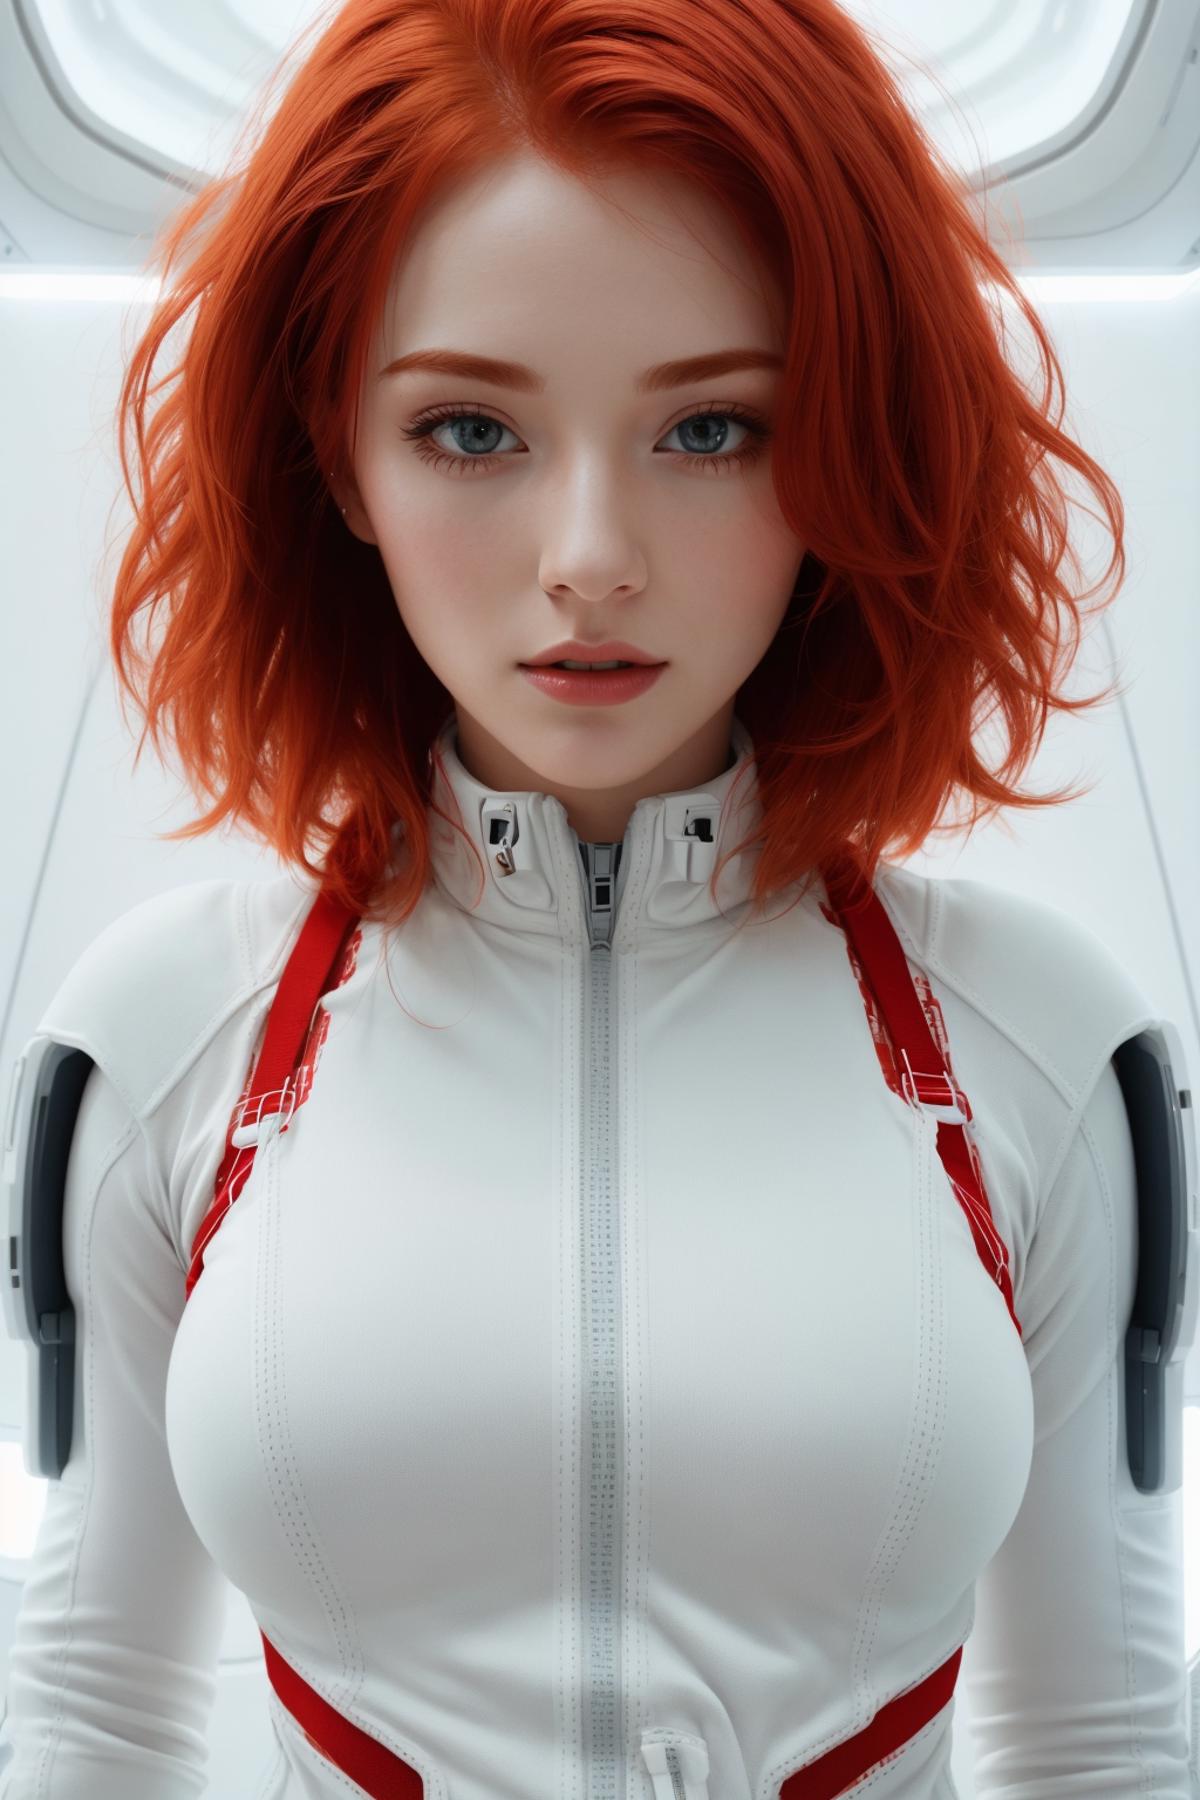 The image features a woman with red hair, wearing a white and red outfit, with a prominent white collar. She has a close-up view, showcasing her features and the intricate details of her outfit. The woman appears to be standing in front of a white wall, which may be a background or a part of her surroundings. The overall focus of the image is on the woman and her striking appearance.